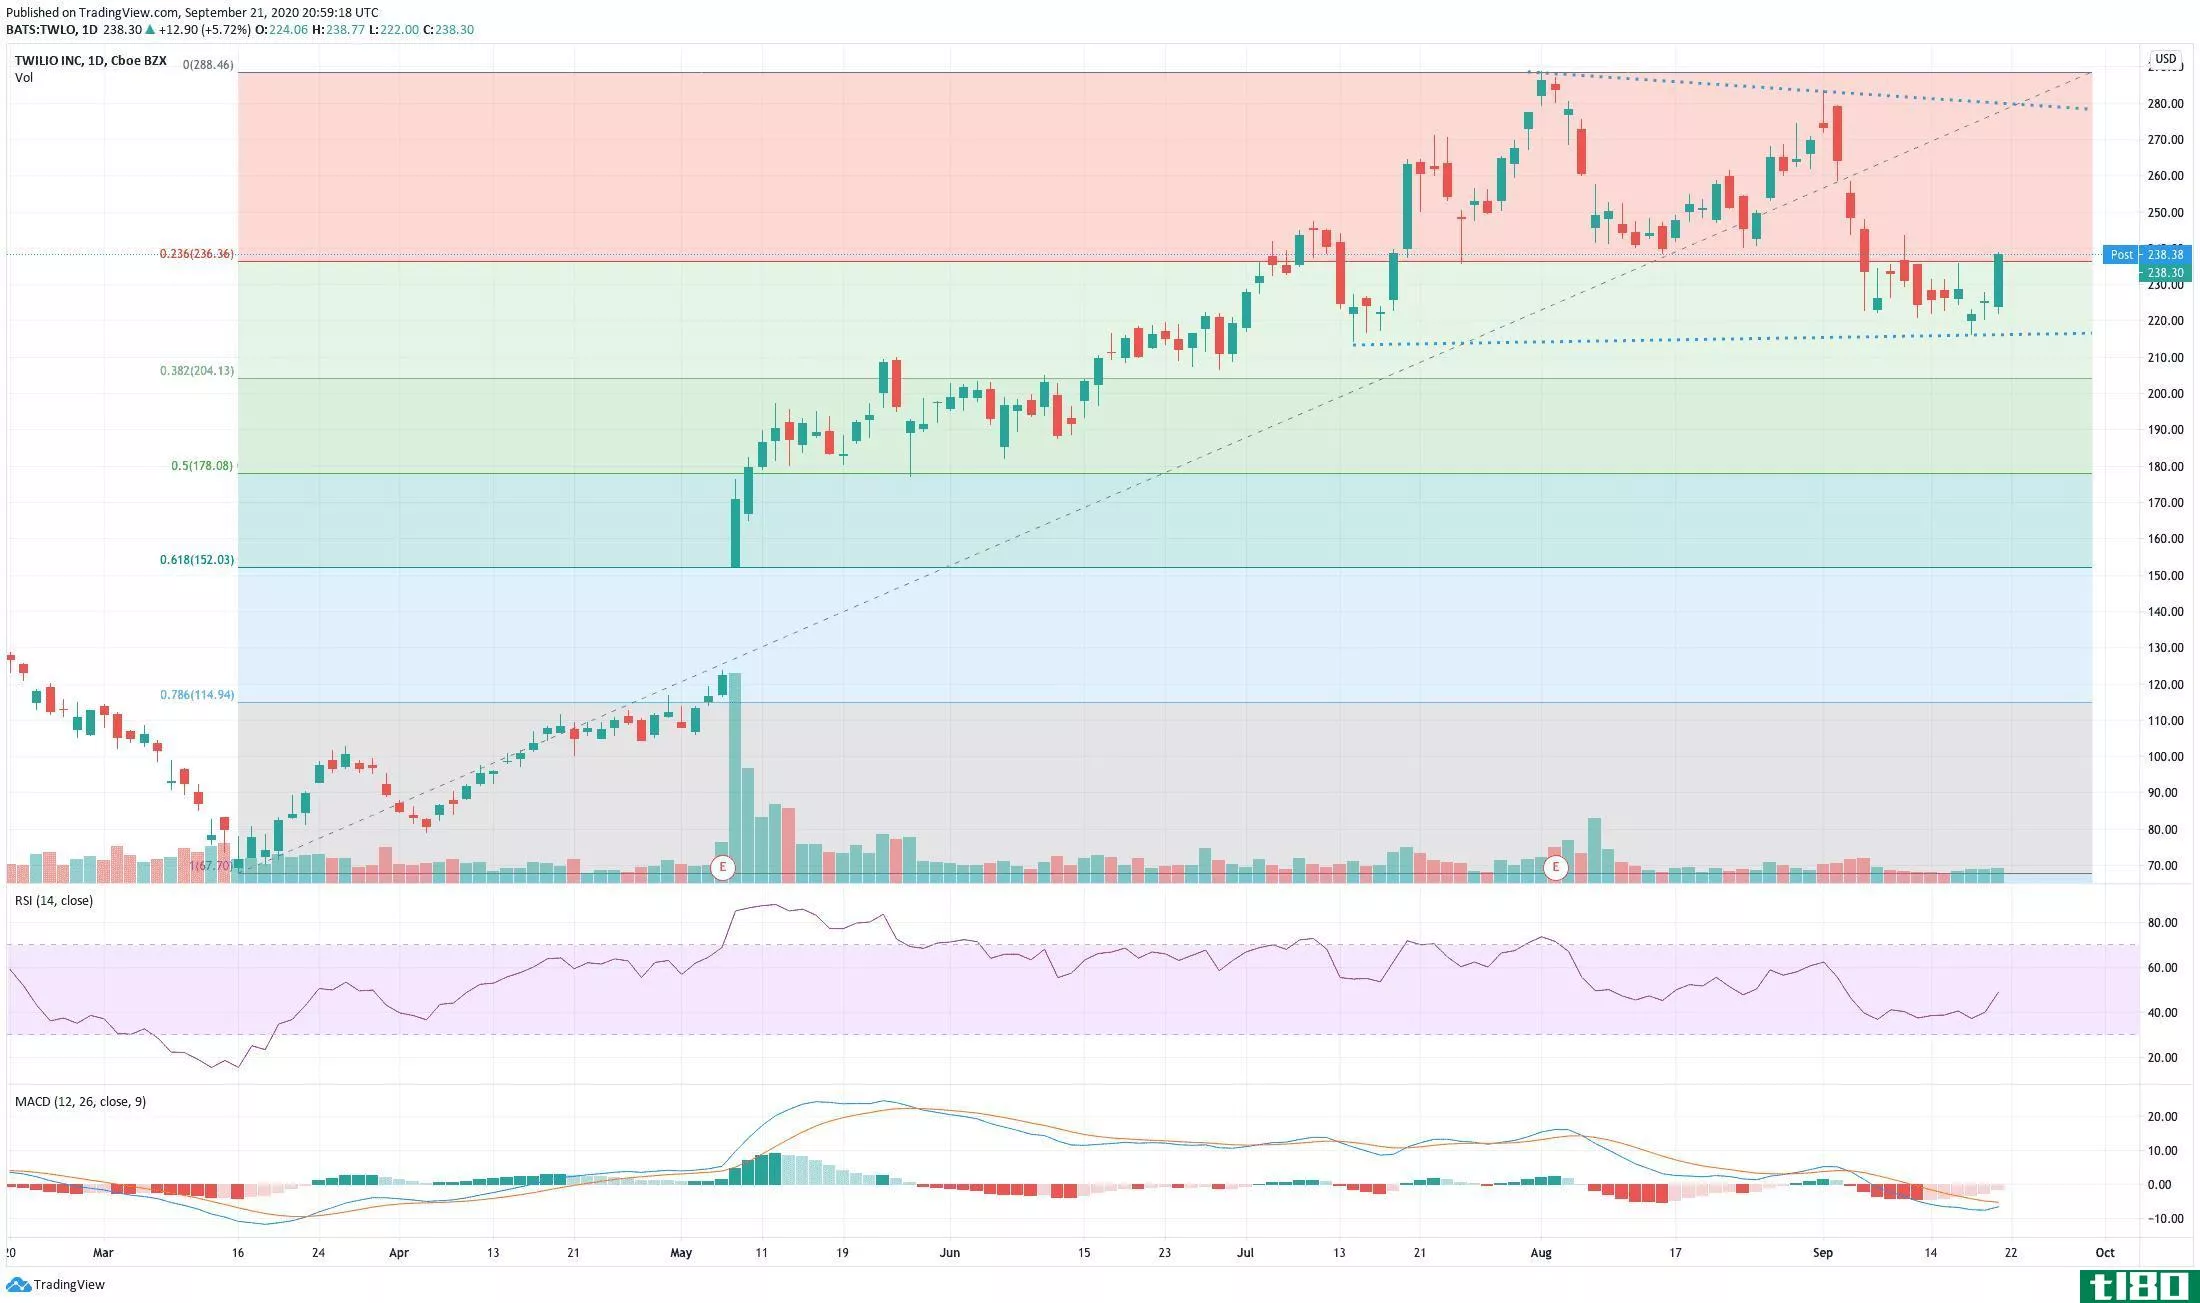 Chart showing the share price performance of Twilio Inc. (TWLO)